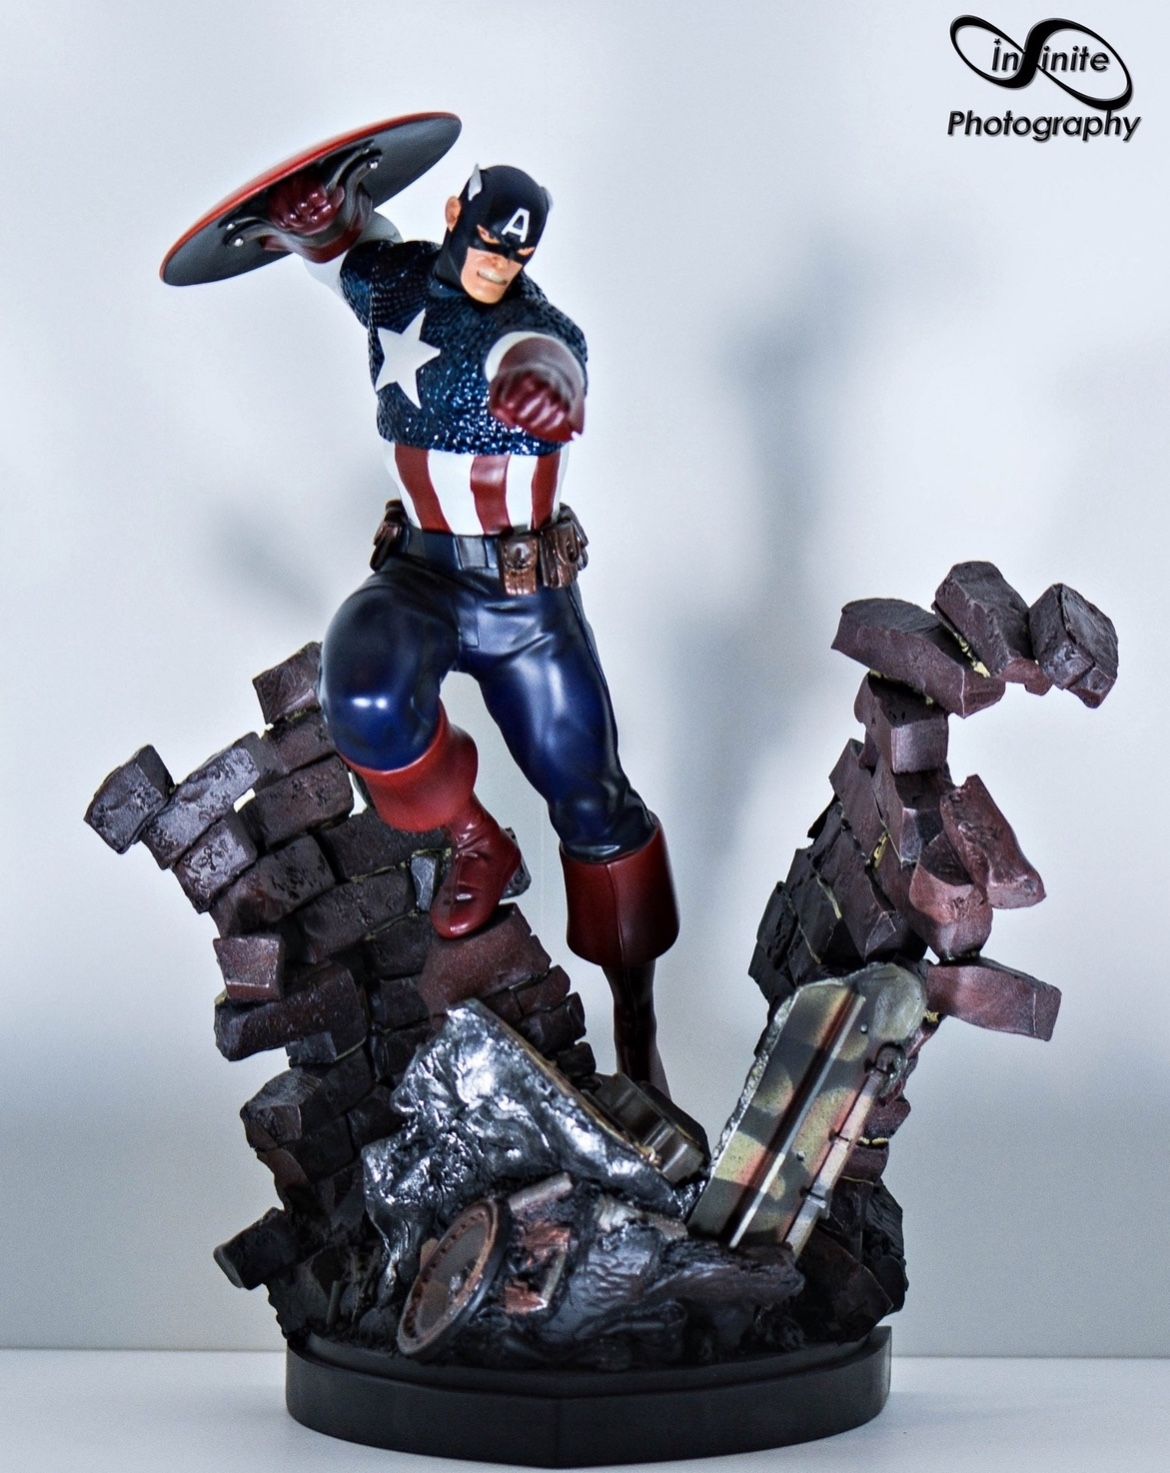 Bowen Captain America 1/6th statue. Local pick up only.